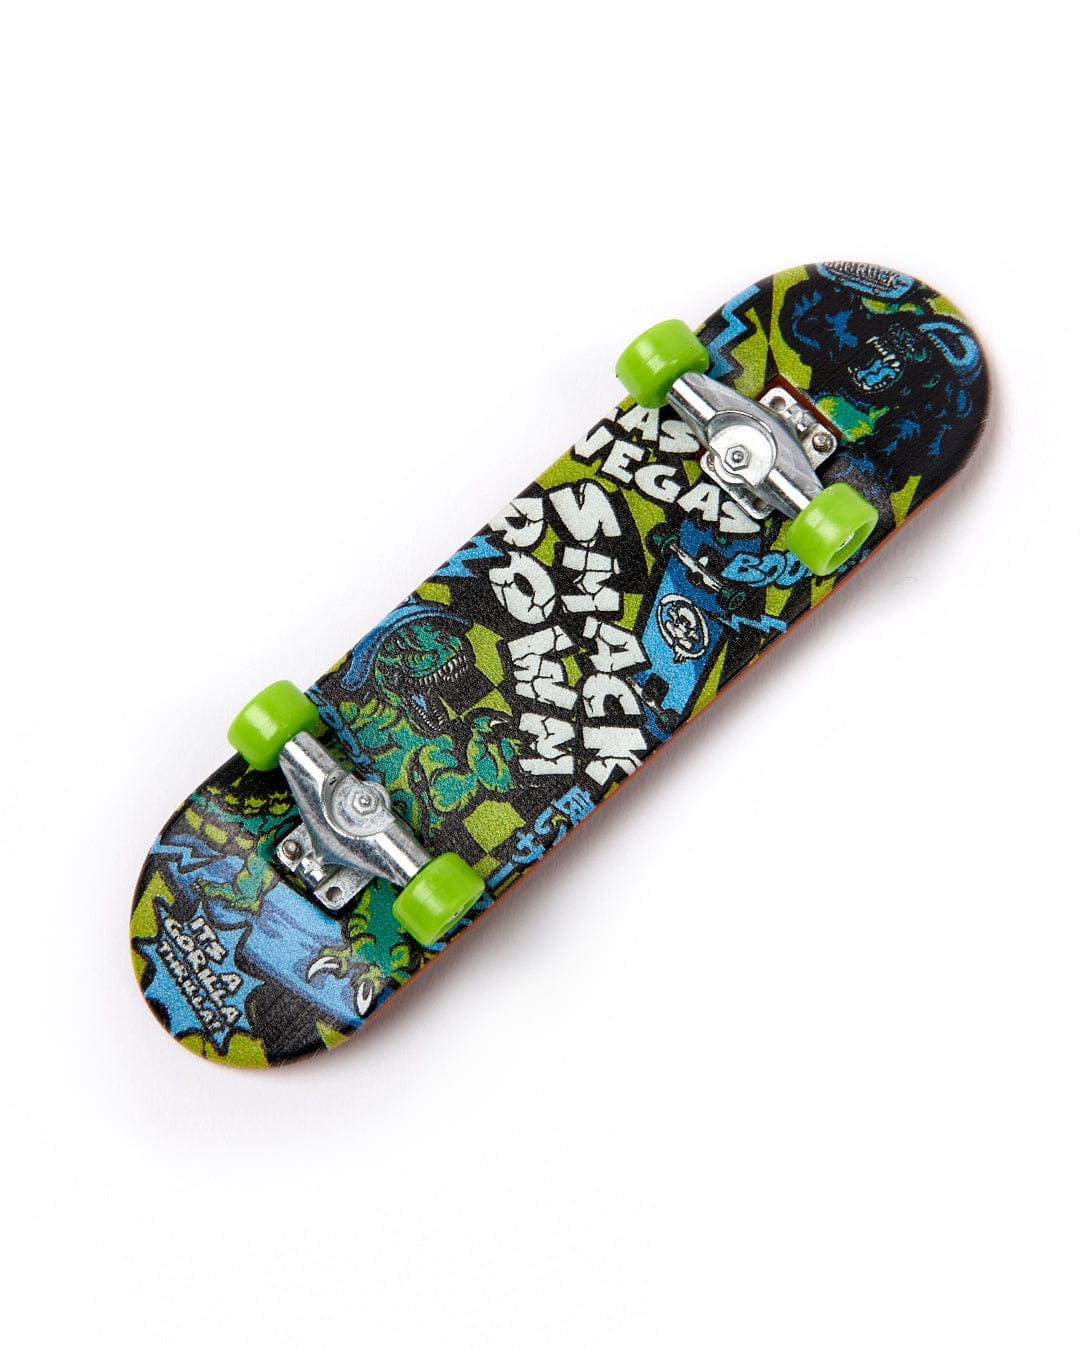 This Smackdown skateboard features a green and black design with metal brackets by Saltrock.